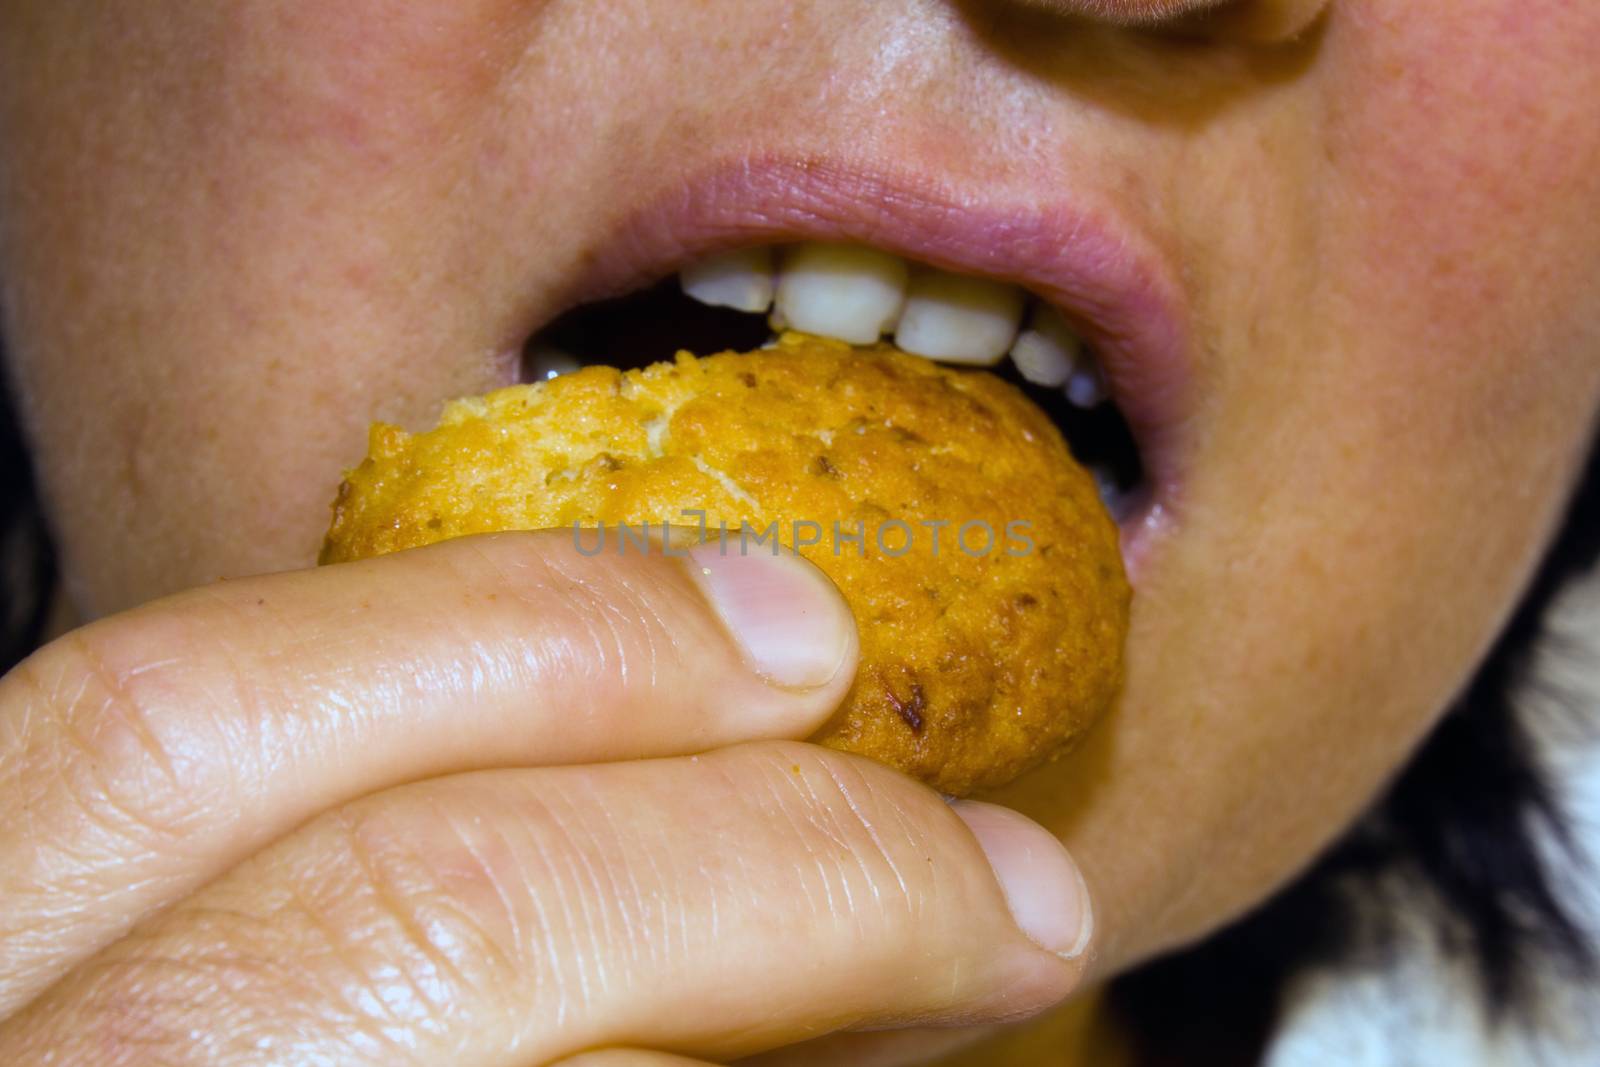 part of the face and hand of a woman holding and eating a cookie